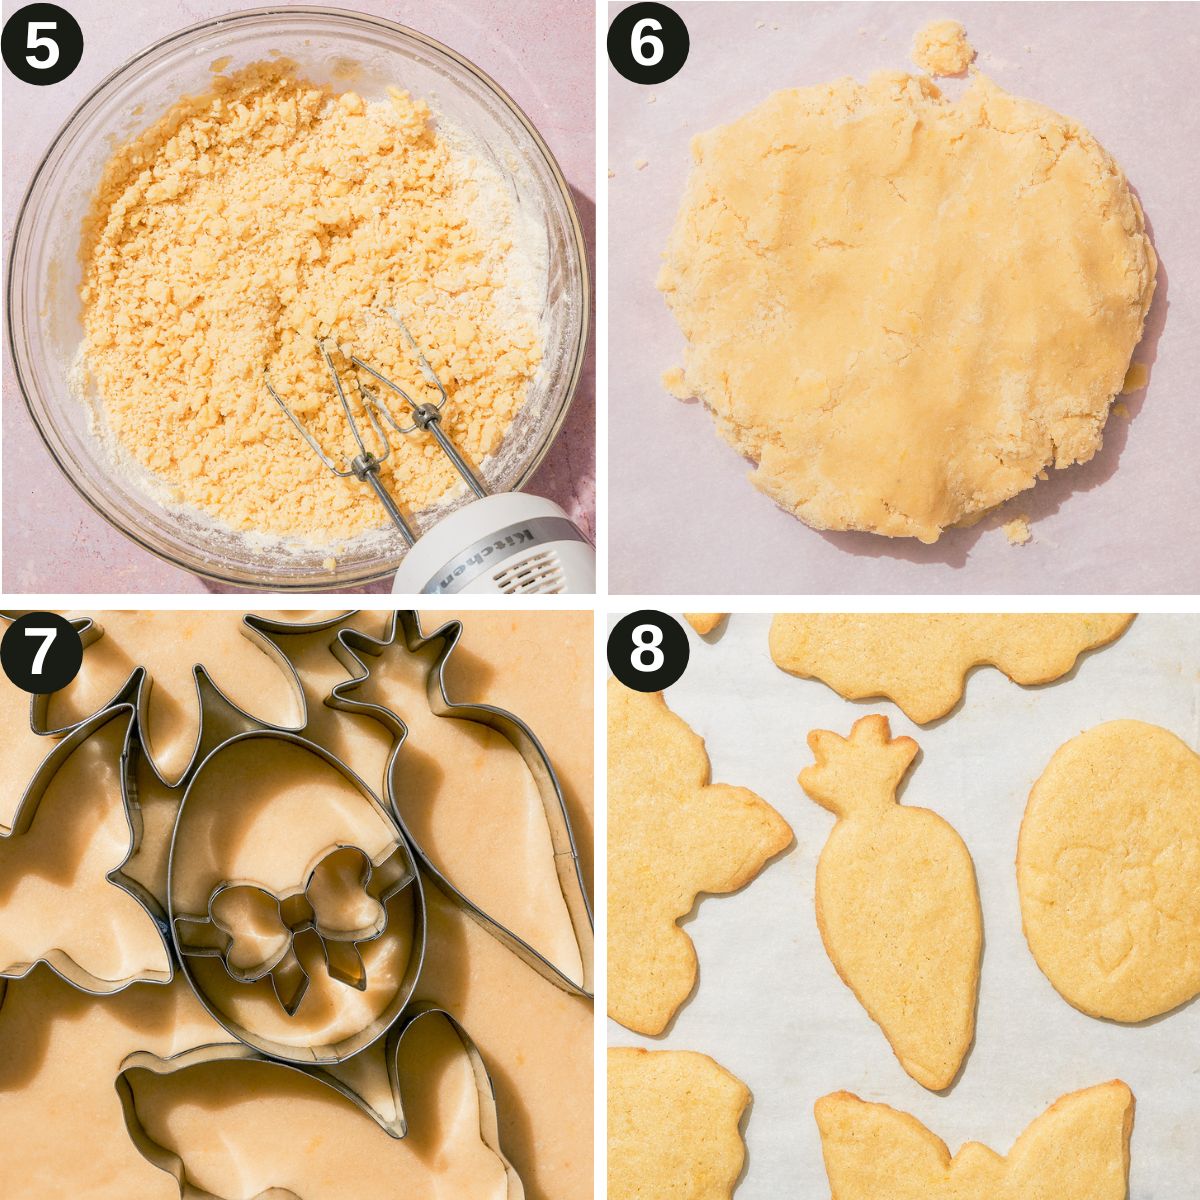 Sugar cookies steps 5 to 8, finished dough and cut out cookies.